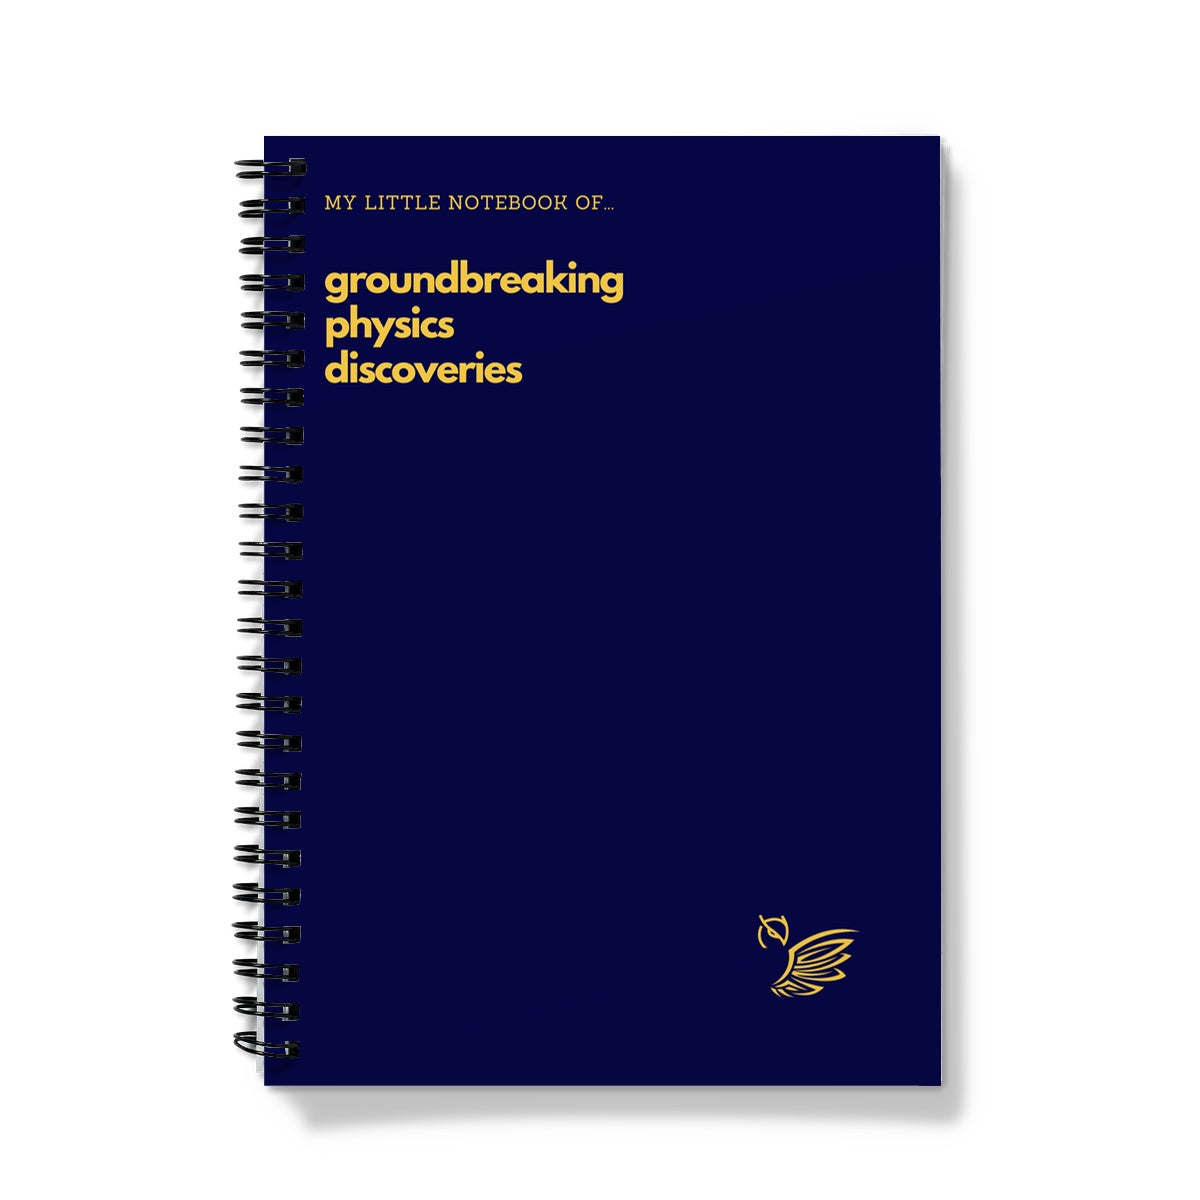 My Little Notebook Of... Groundbreaking Physics Discoveries Notebook